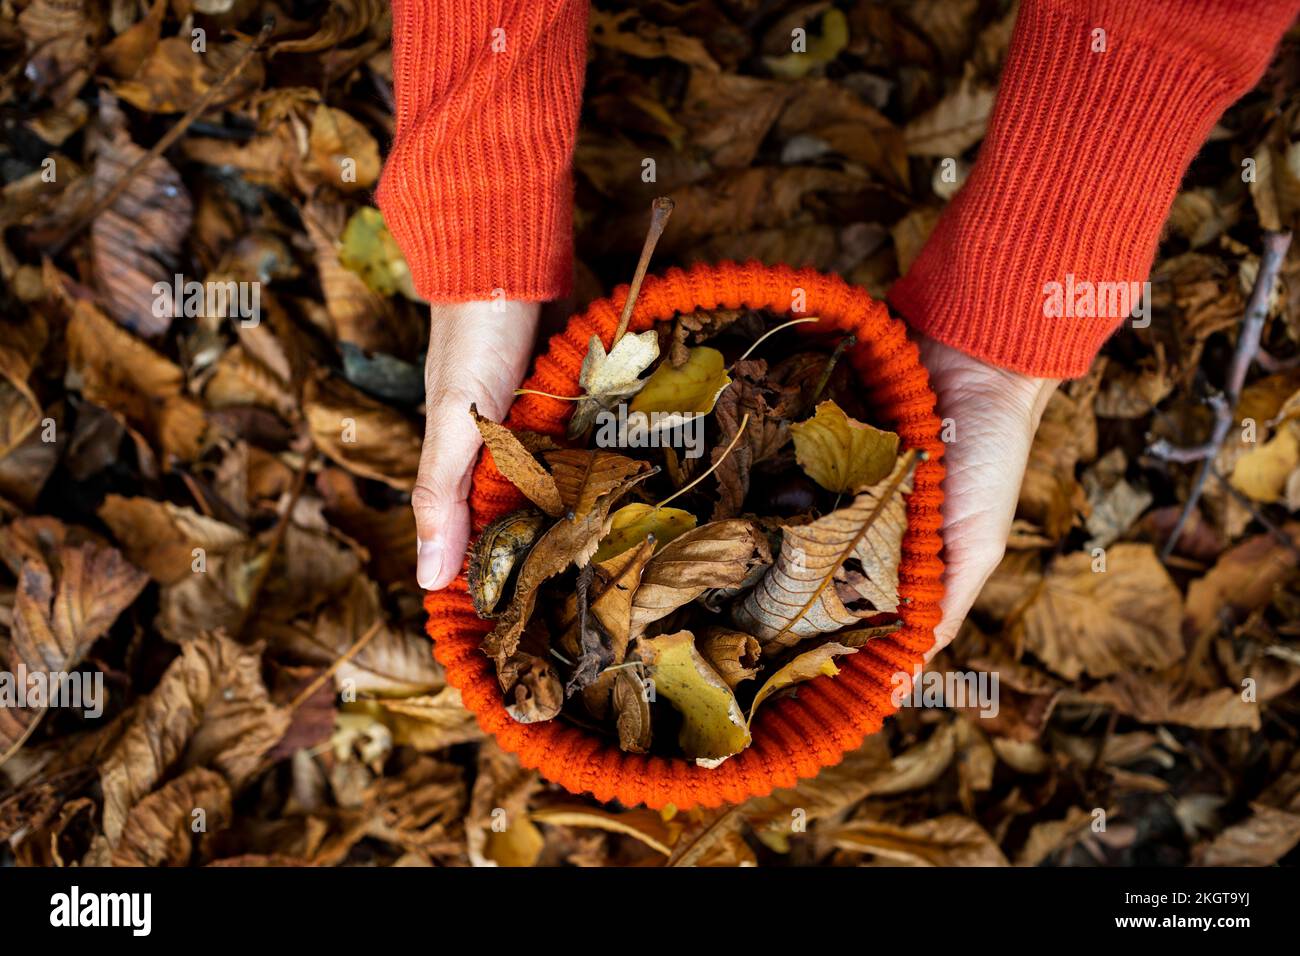 Woman collecting autumn leaves in knit hat Stock Photo